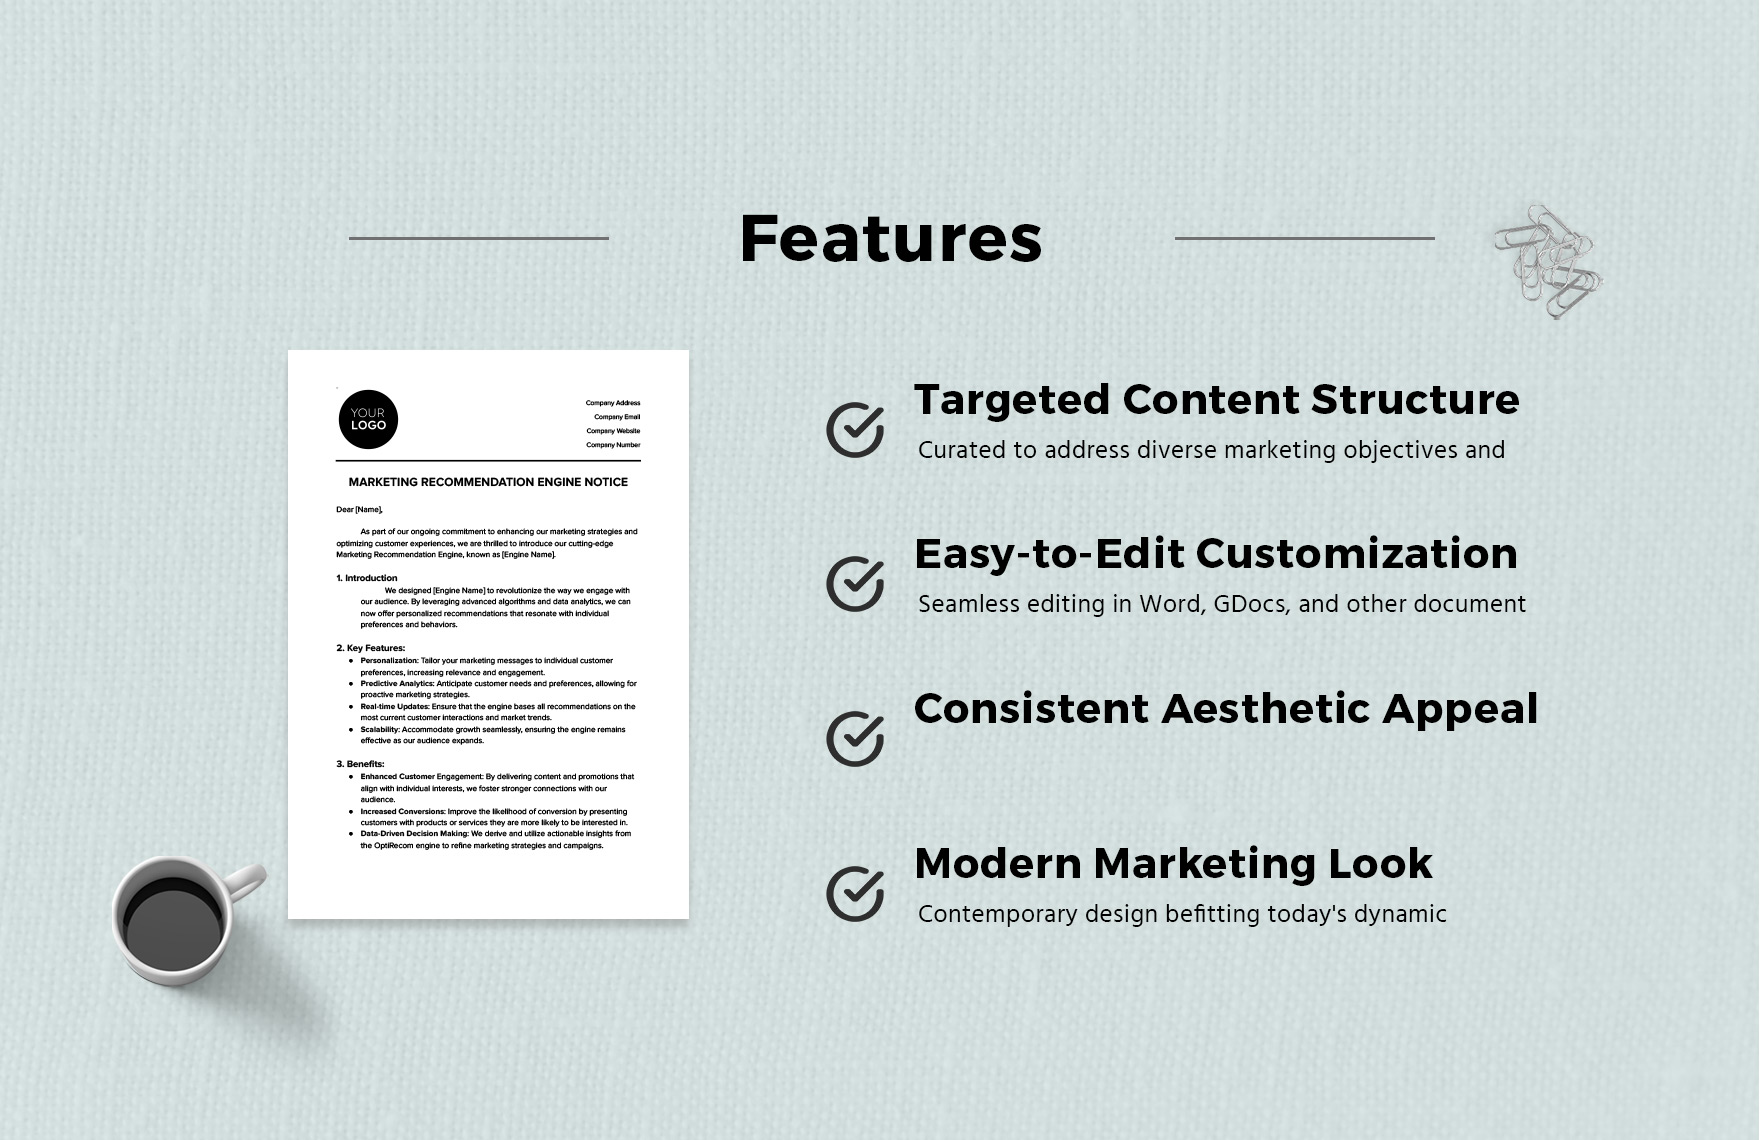 Marketing Recommendation Engine Notice Template